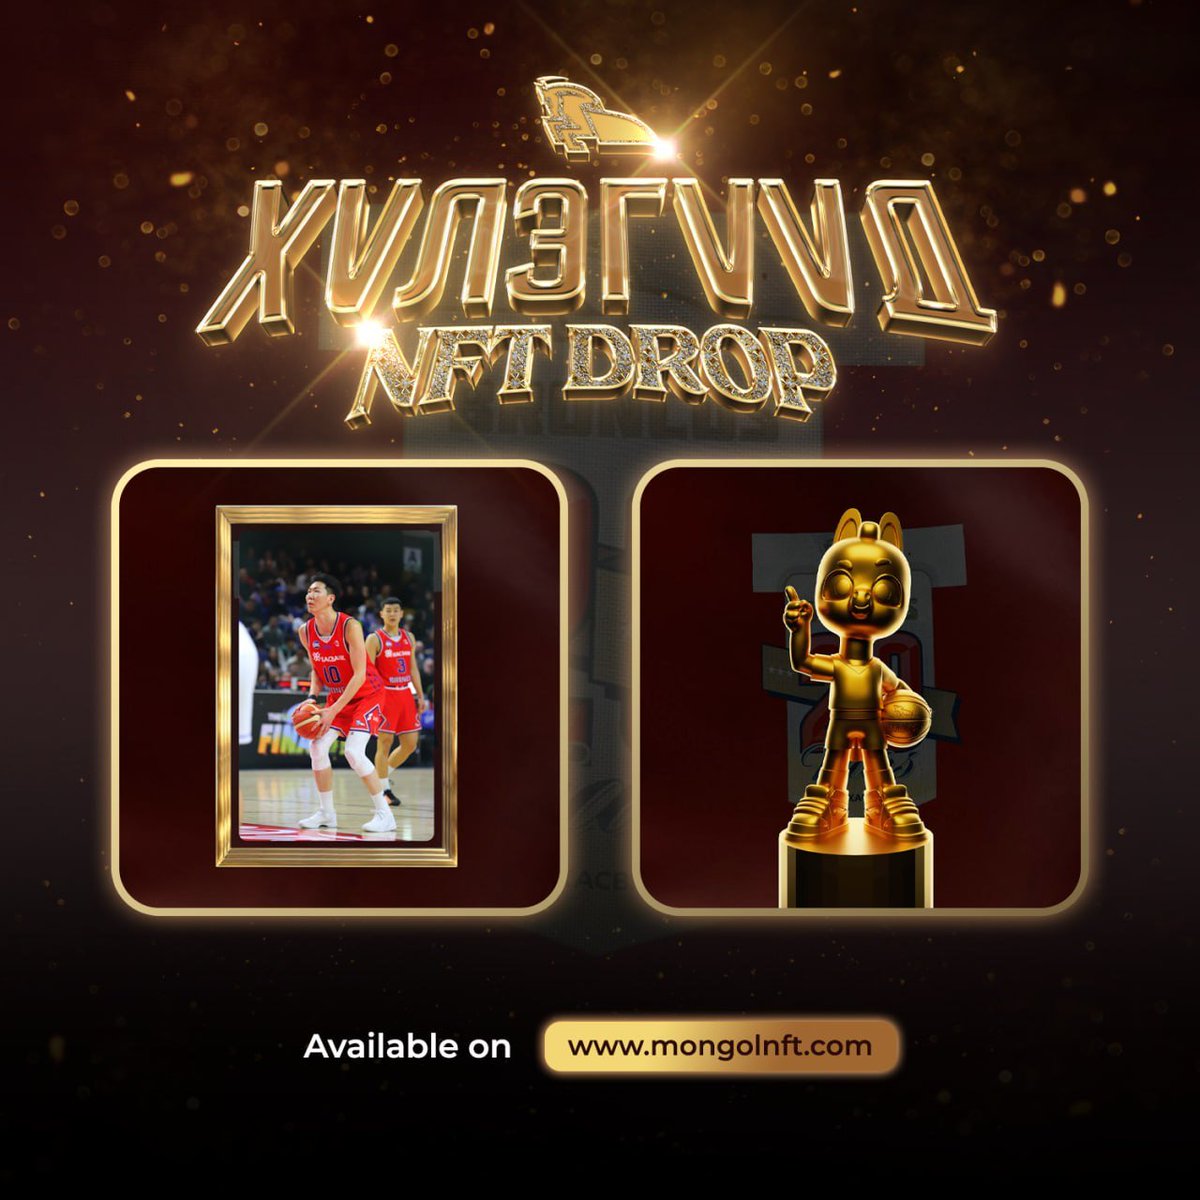 🏀 The Khuleguud Basketball NFT drop is LIVE now! 

Celebrate 20 years as 8-time national pro basketball winners with this exclusive collection. Don't miss out – score your Khuleguud NFT now! 
#KhuleguudNFT #BasketballLegends #NFTCollectibles